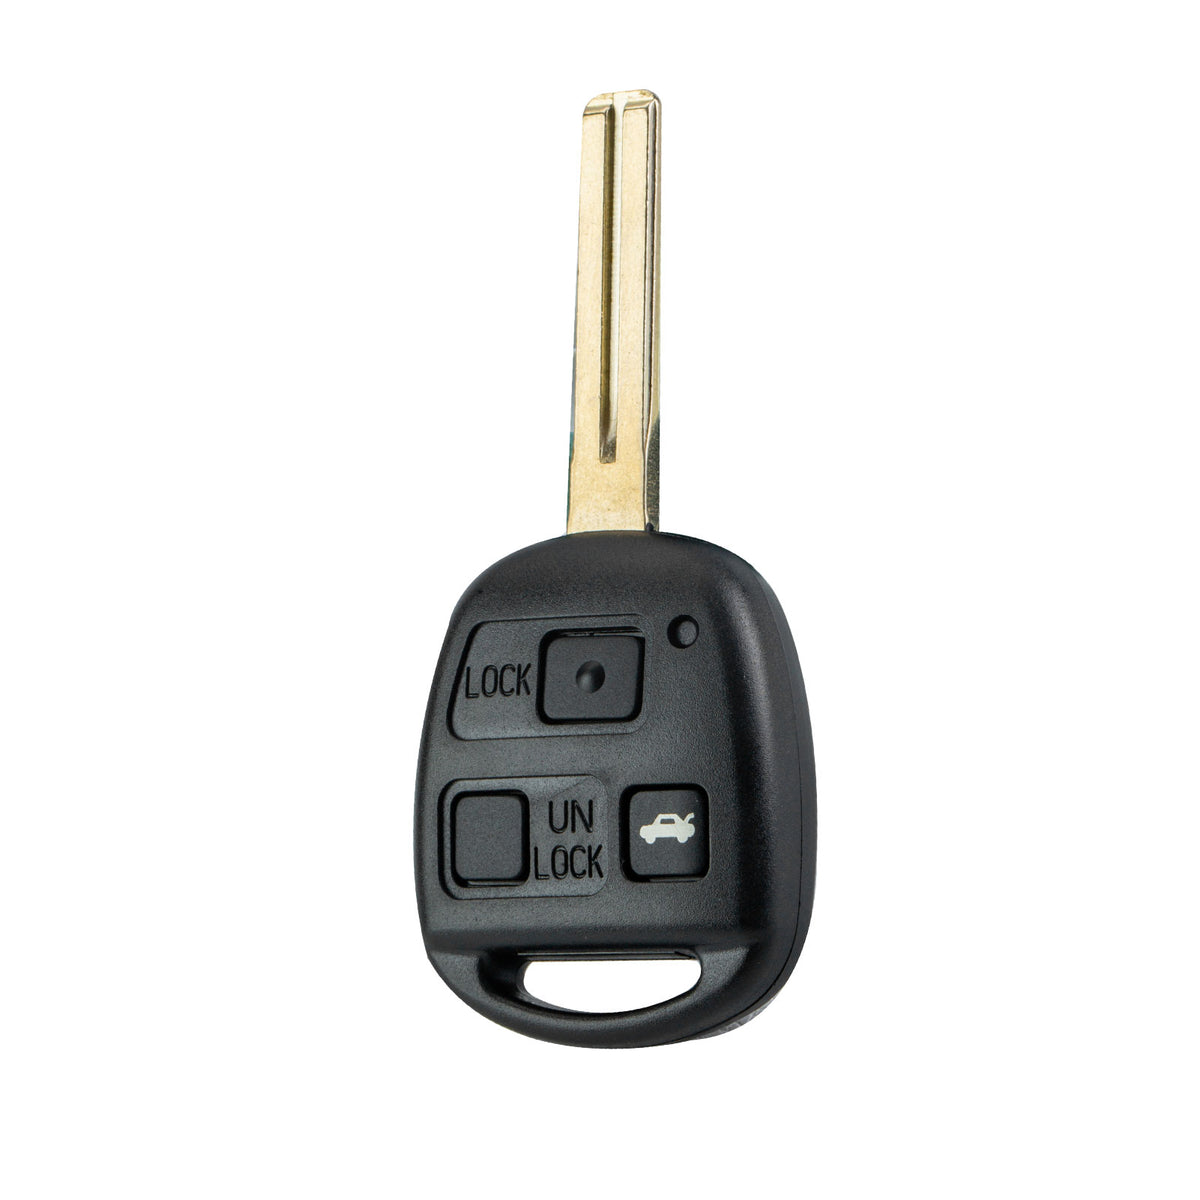 Keyless Entry Remote 4C chip Replacement for Lexus 02-03 ES300 97-05 GS300 98-00 GS400 3 Button,HYQ1512V